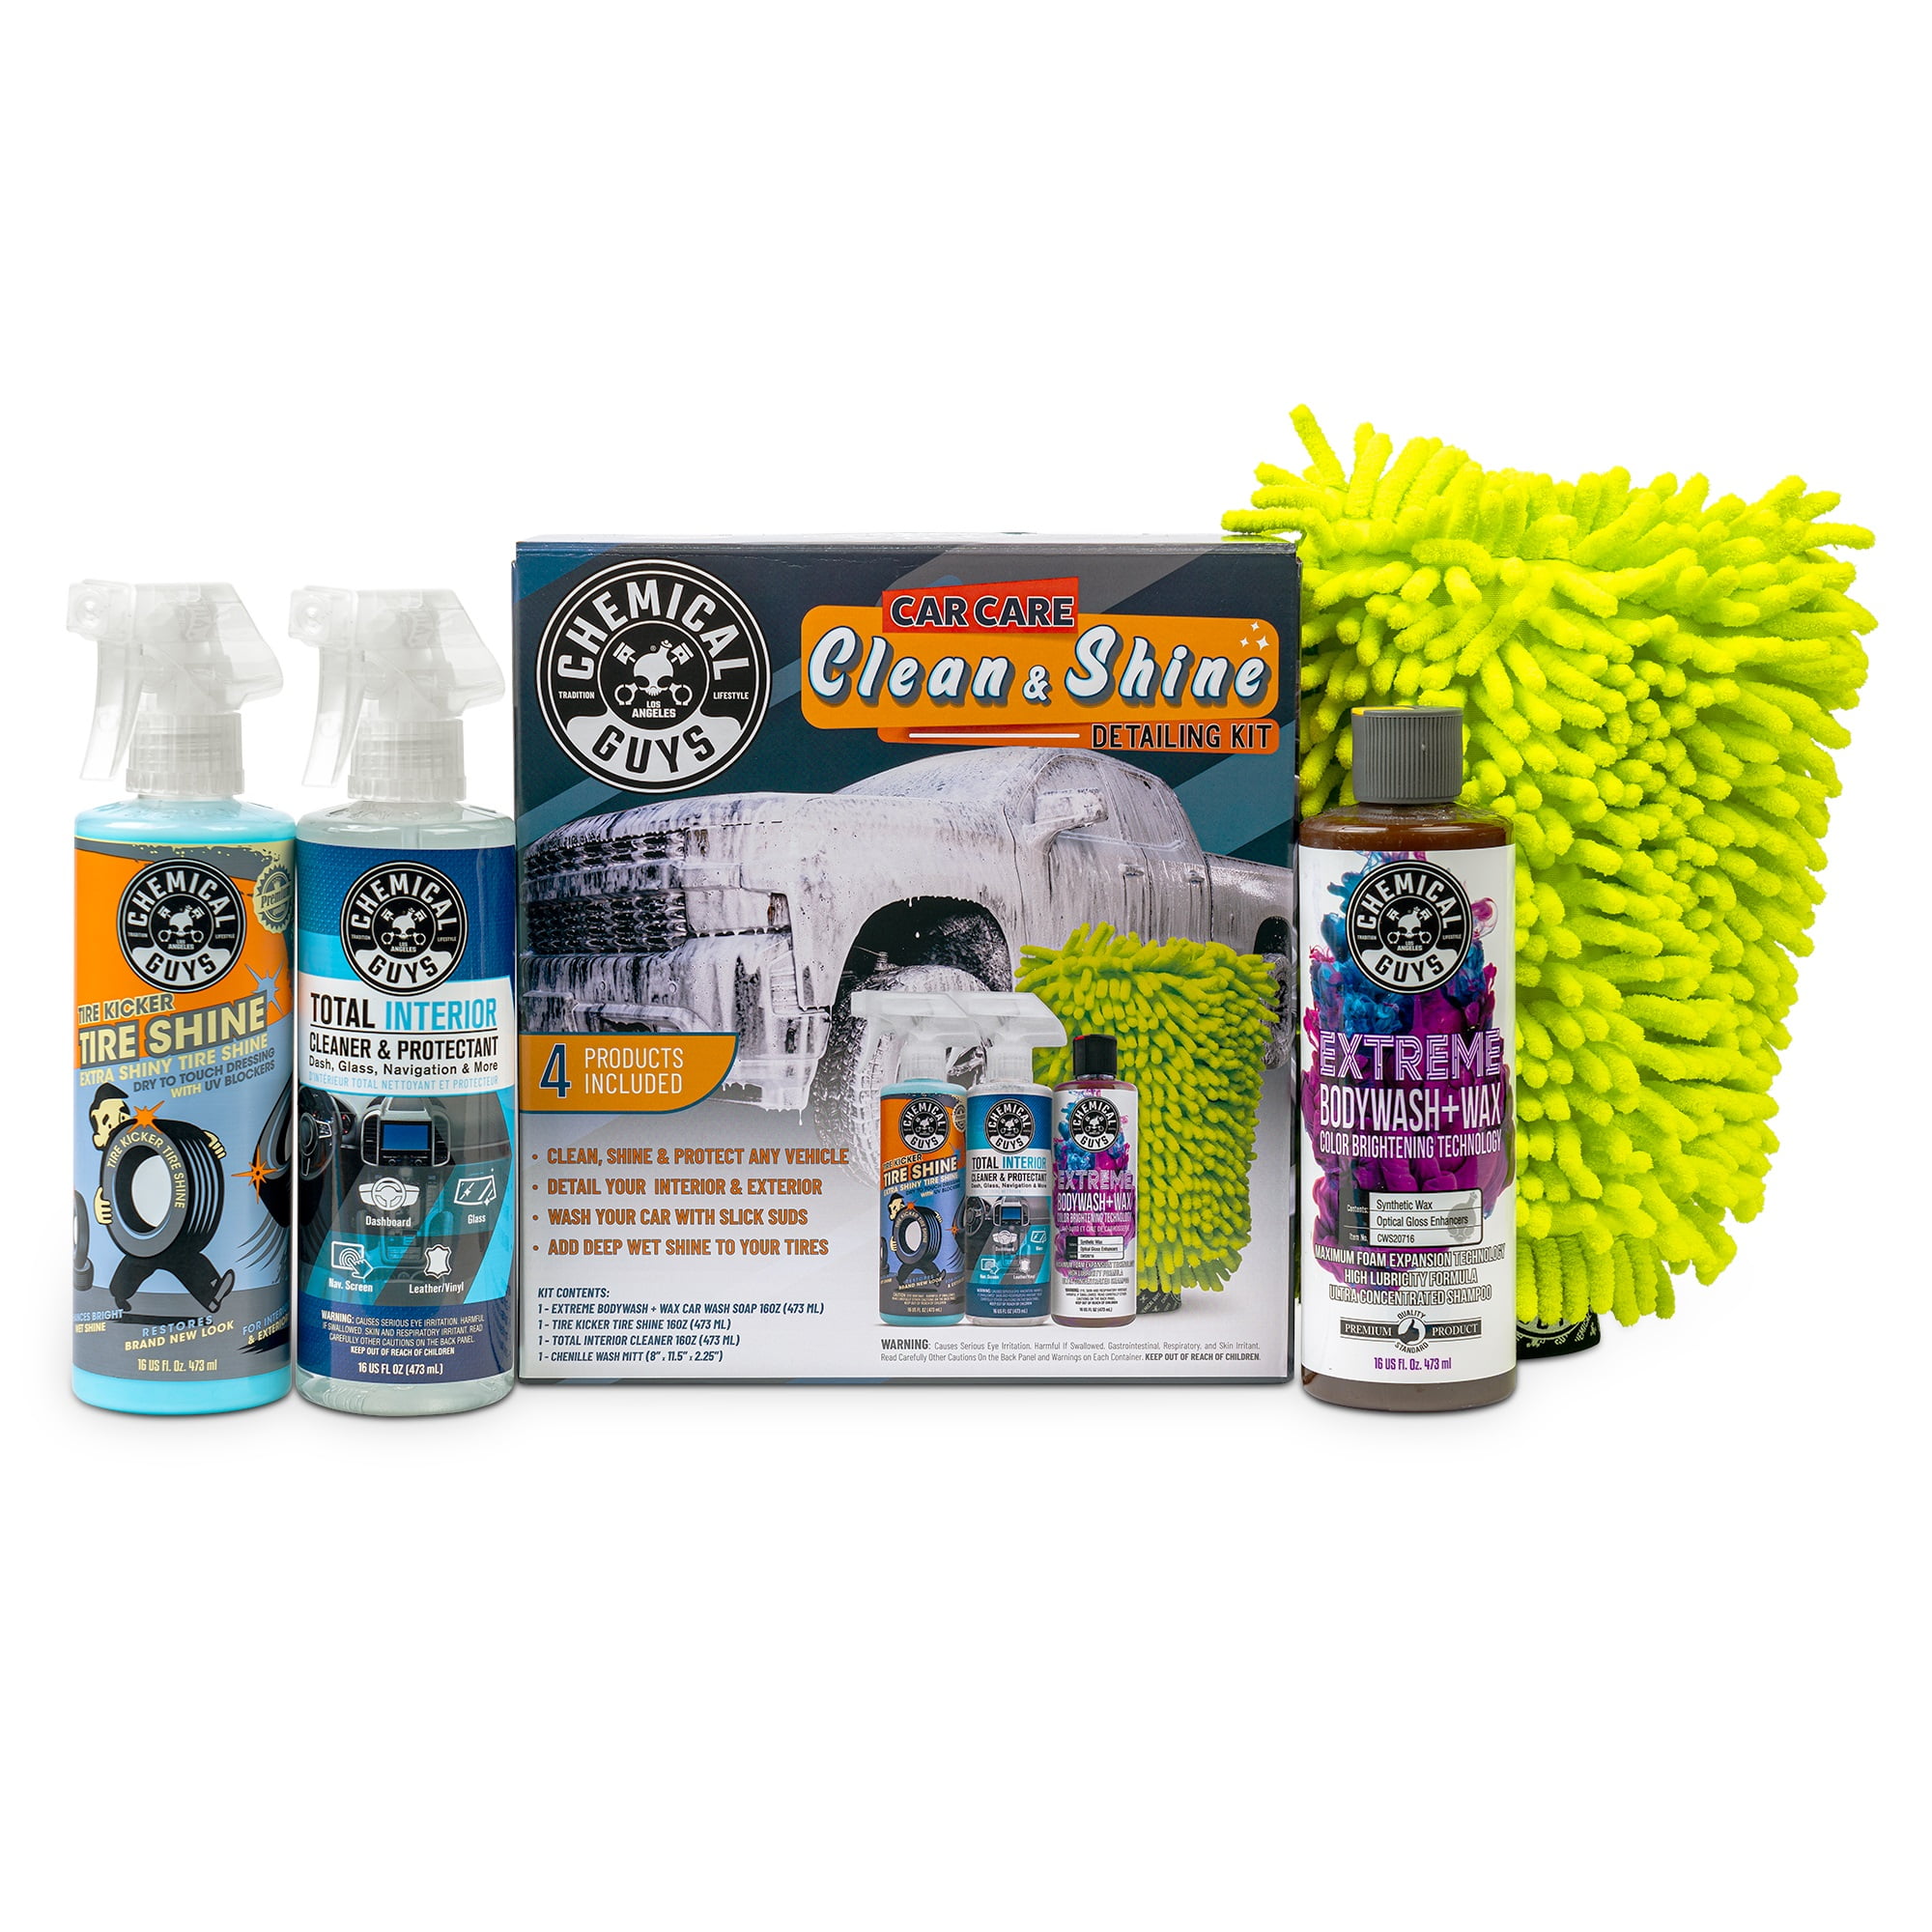 Keep your ride sparkling with up to 20% off Chemical guys car wash kits and  gear from $5